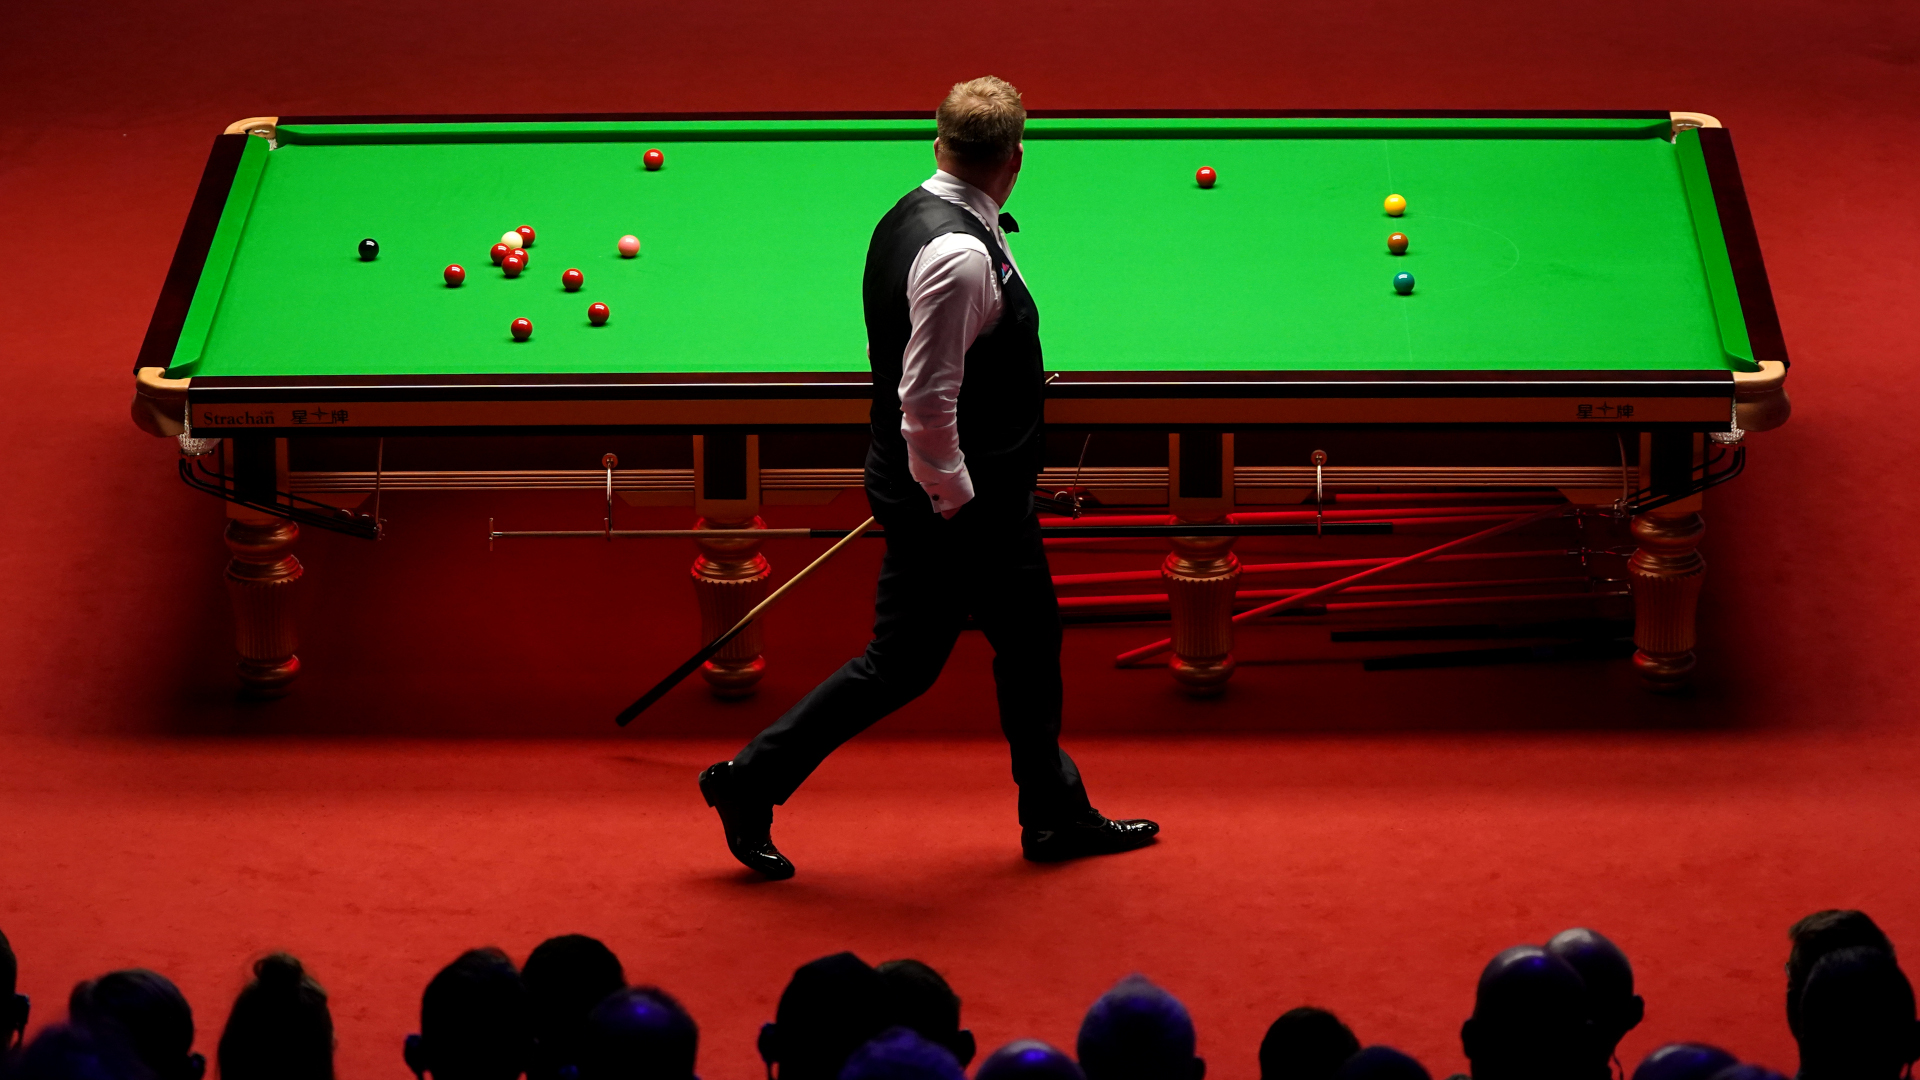 2022 Snooker World Championship live stream how to watch online and on TV from anywhere